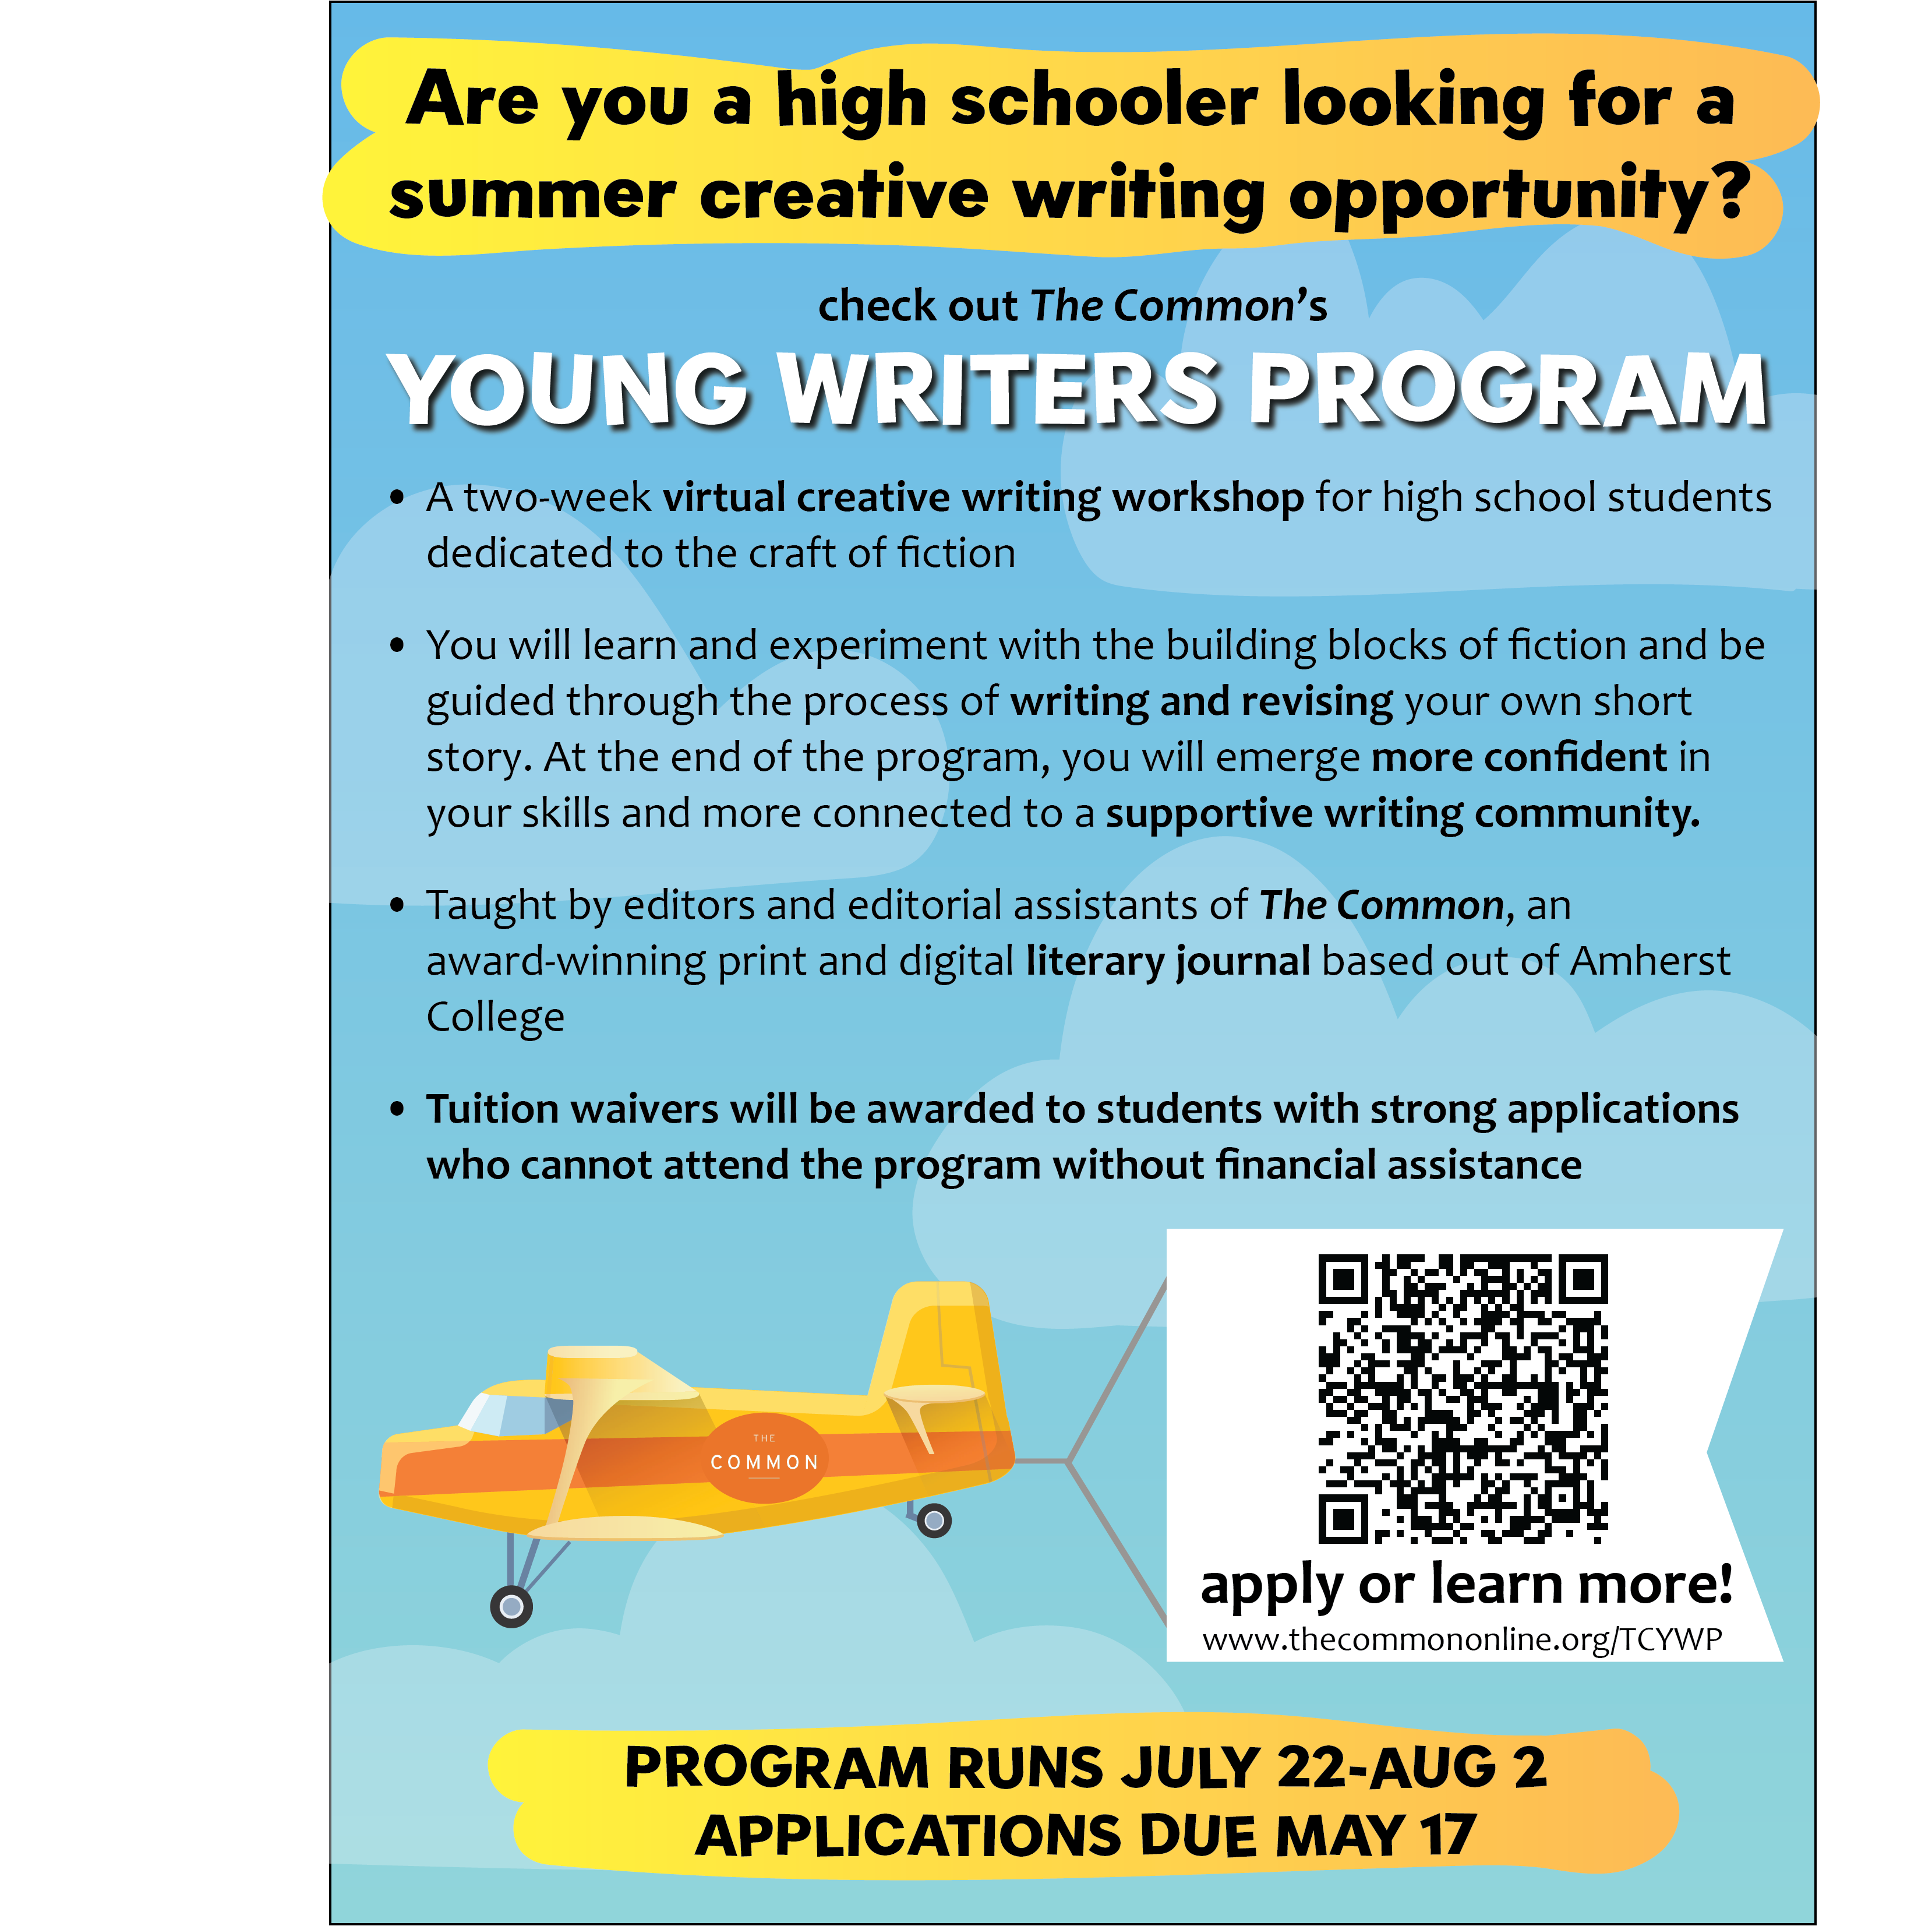 The Common Young Writers program